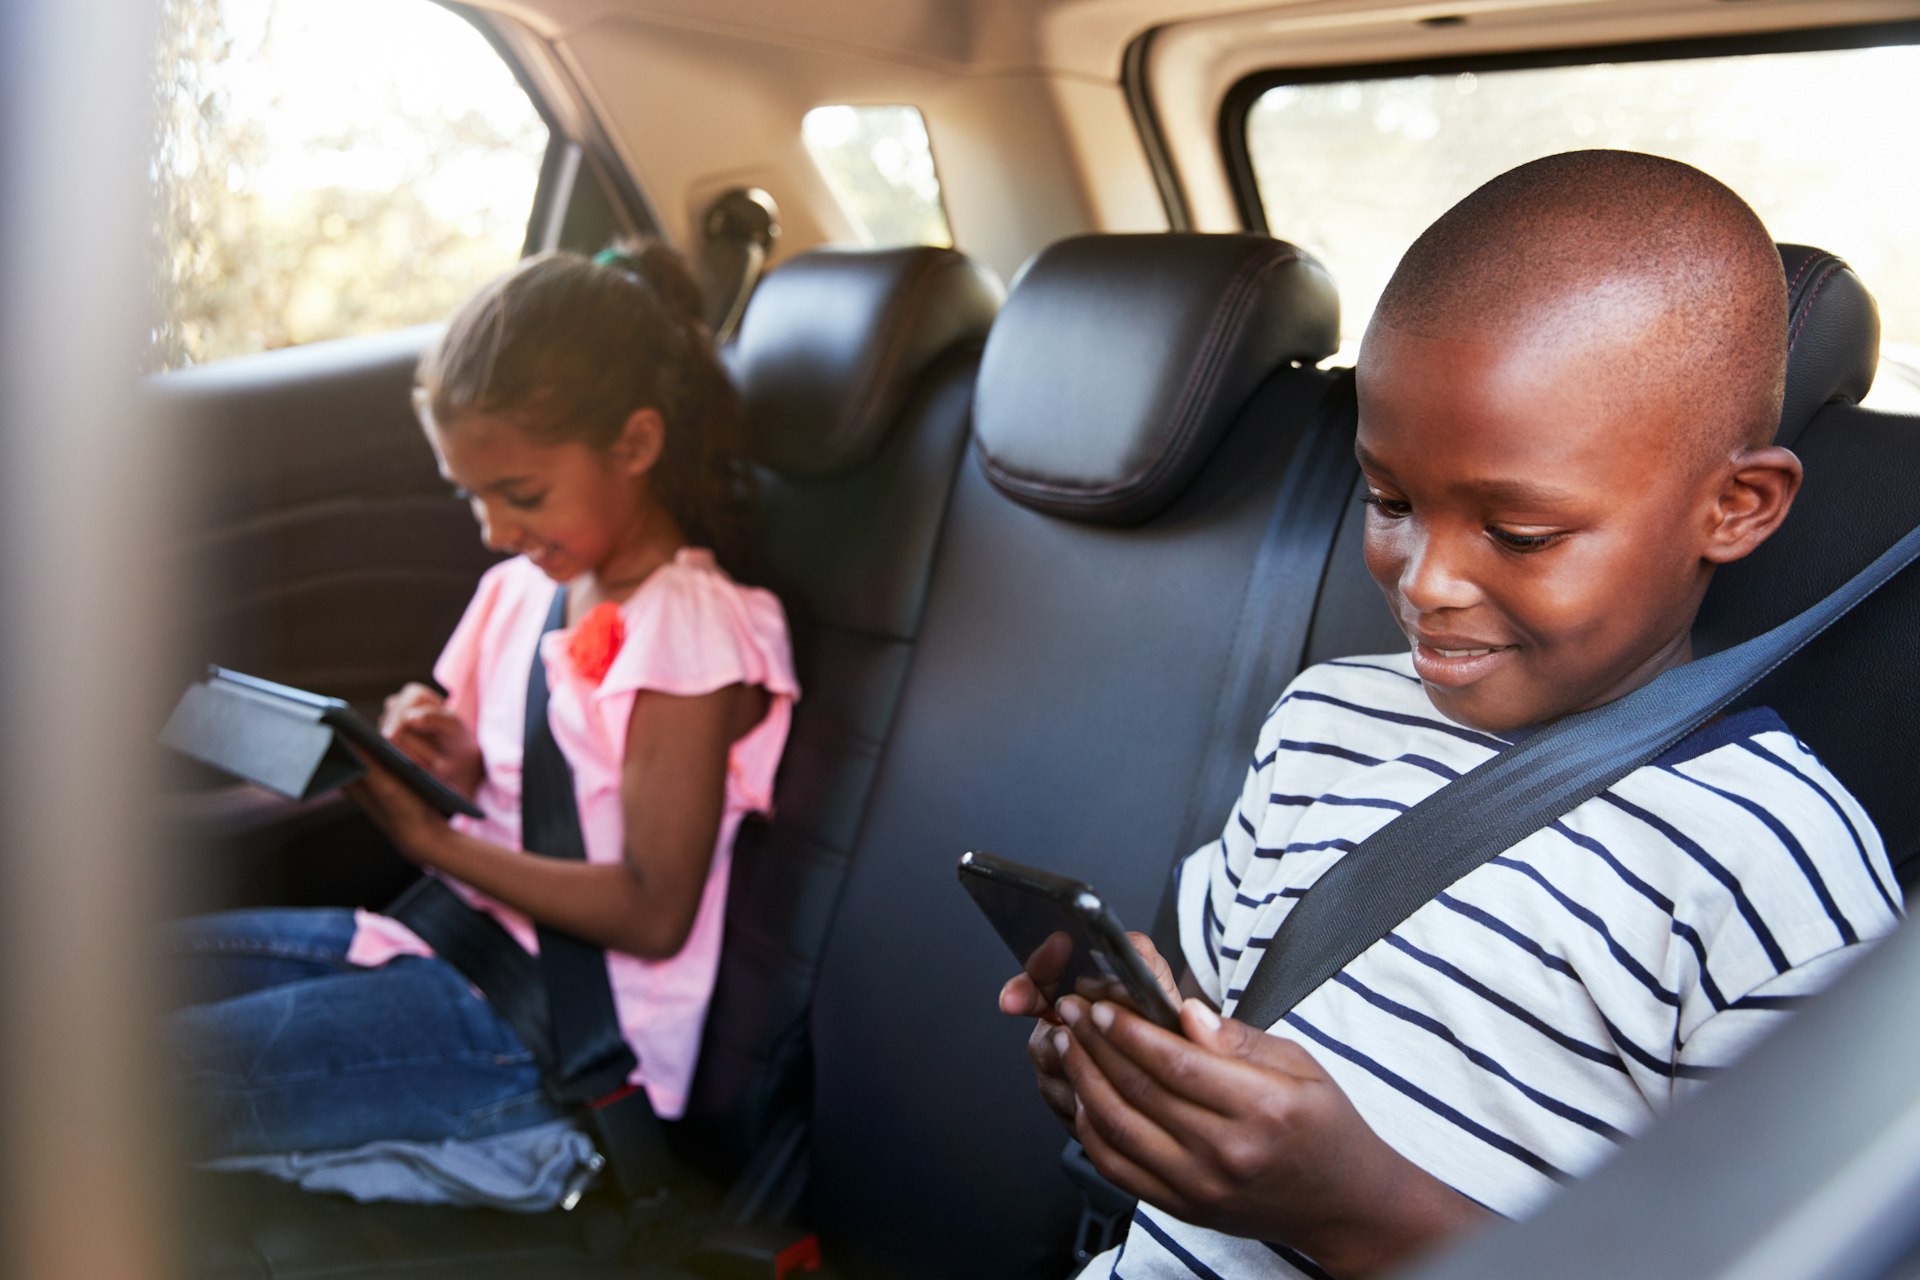 Boy and girl in the back seat of a car using a tablet and smartphone. 